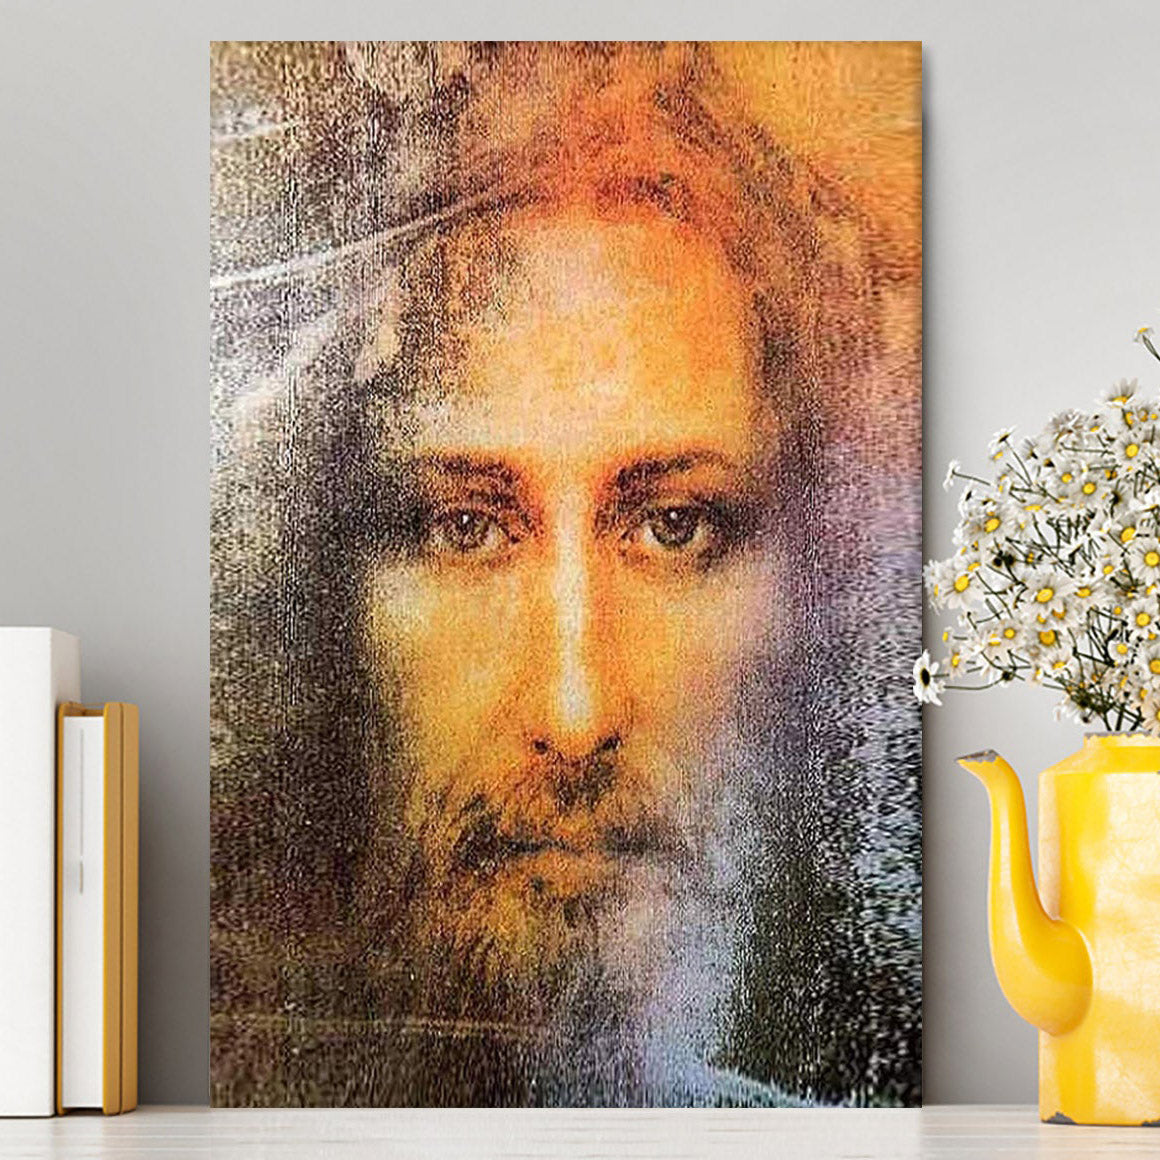 Jesus Christ Wall Art - Jesus Picture - Inspirational Gift For Pastor Priest - Christian Canvas Wall Art Decor